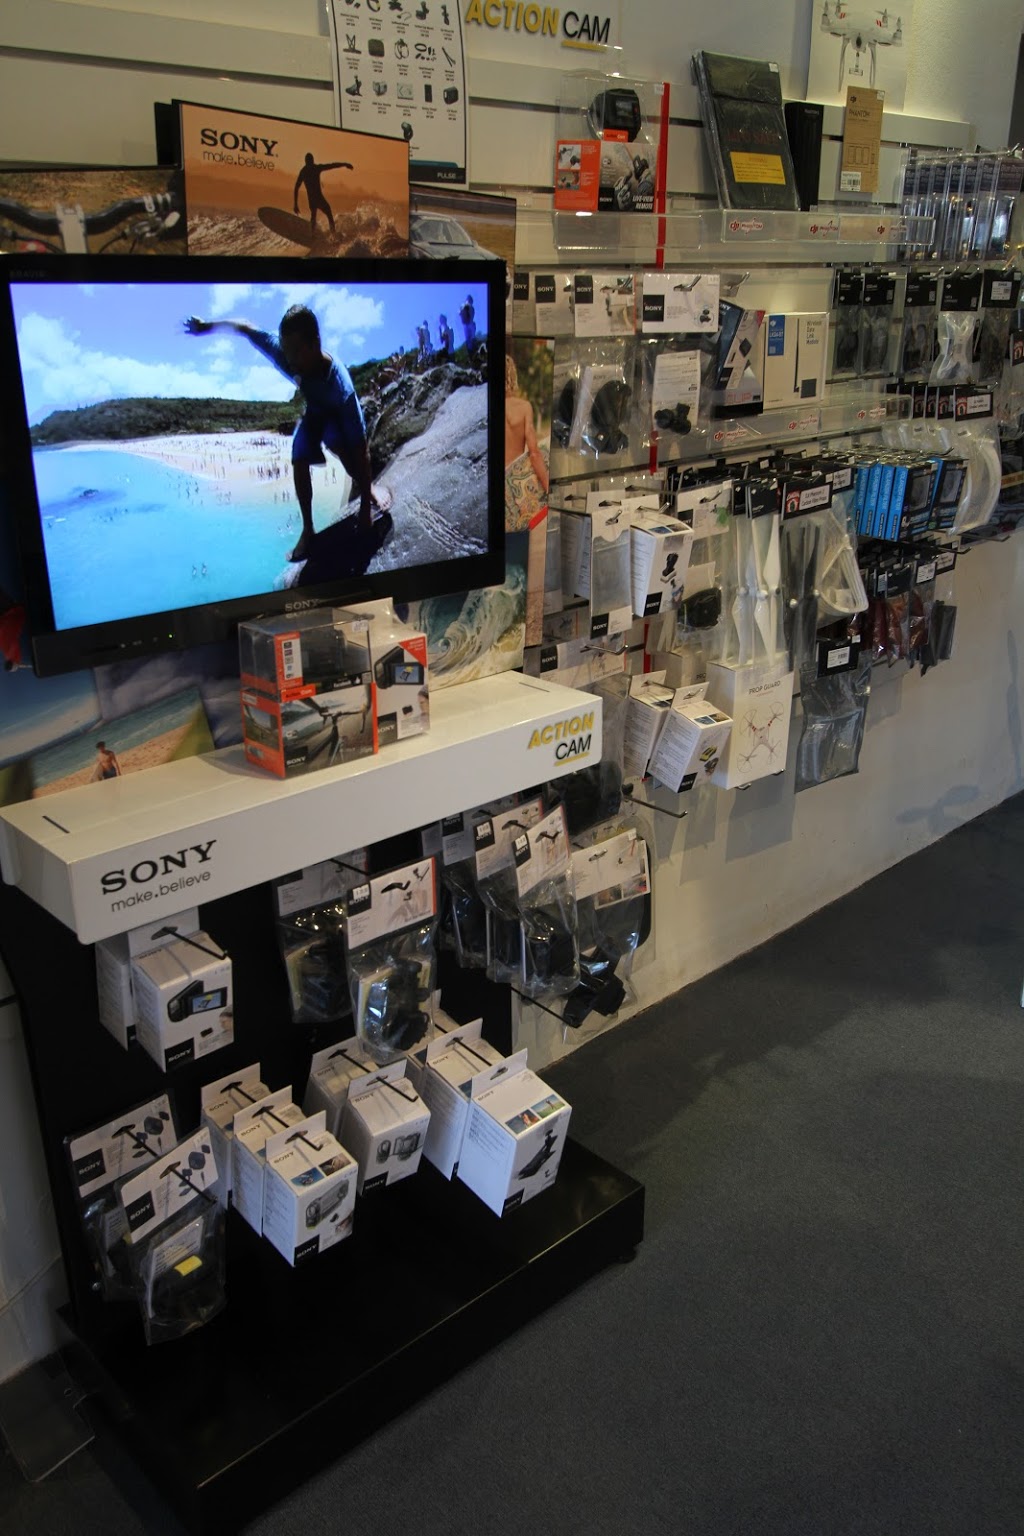 Camzilla | The Drone Experts | 98 Pacific Hwy, Roseville NSW 2069, Australia | Phone: (02) 9880 9883